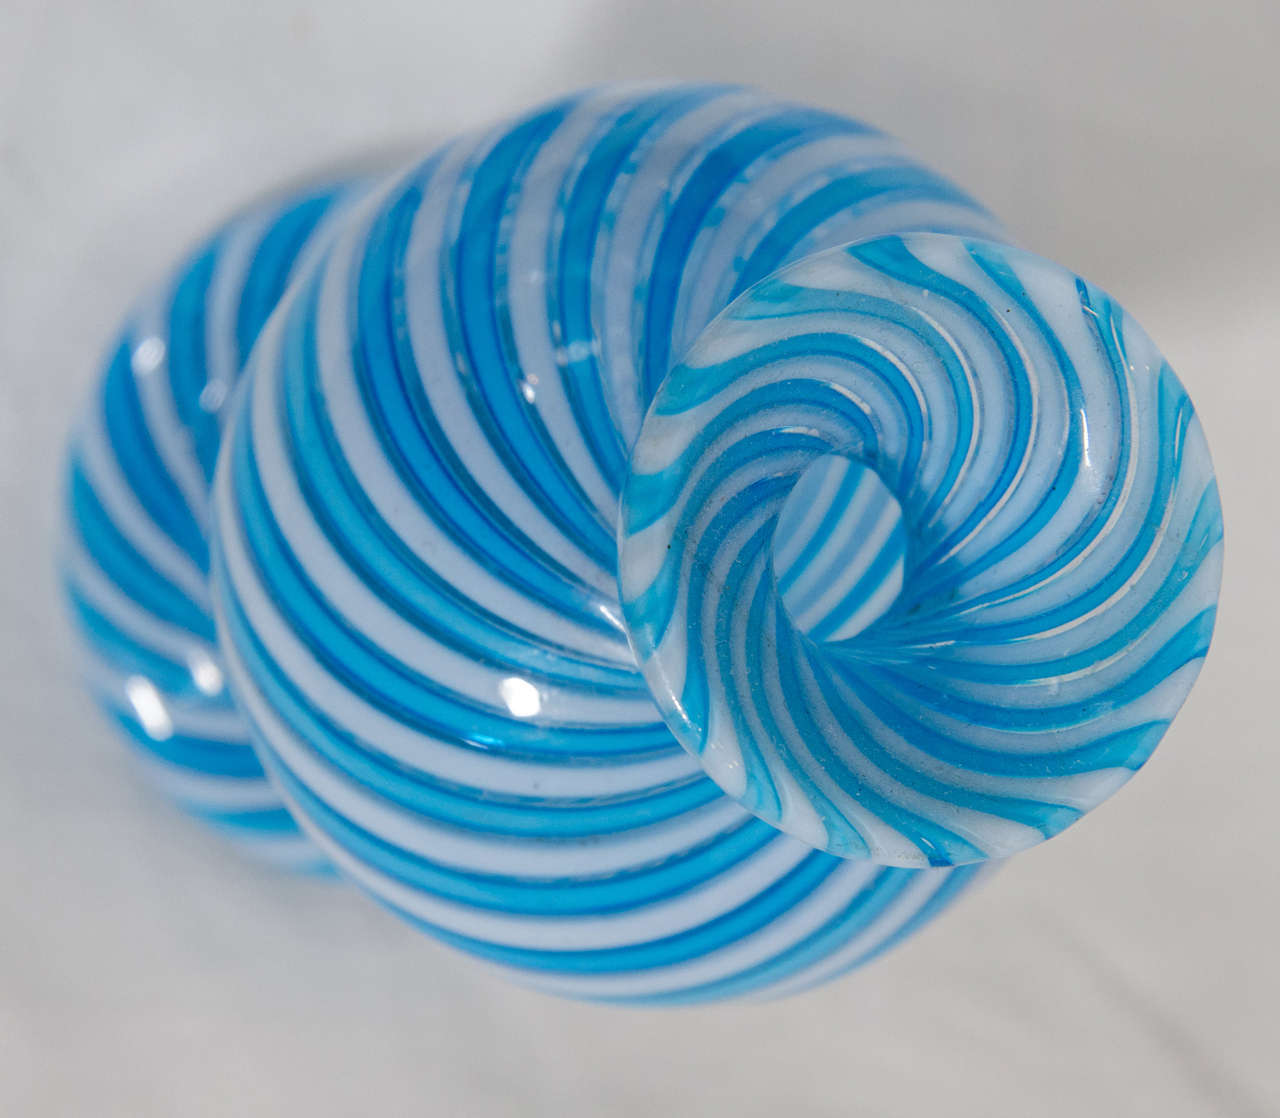 A delicate 19th century colored glass scent bottle and stopper with blue and white swirls.